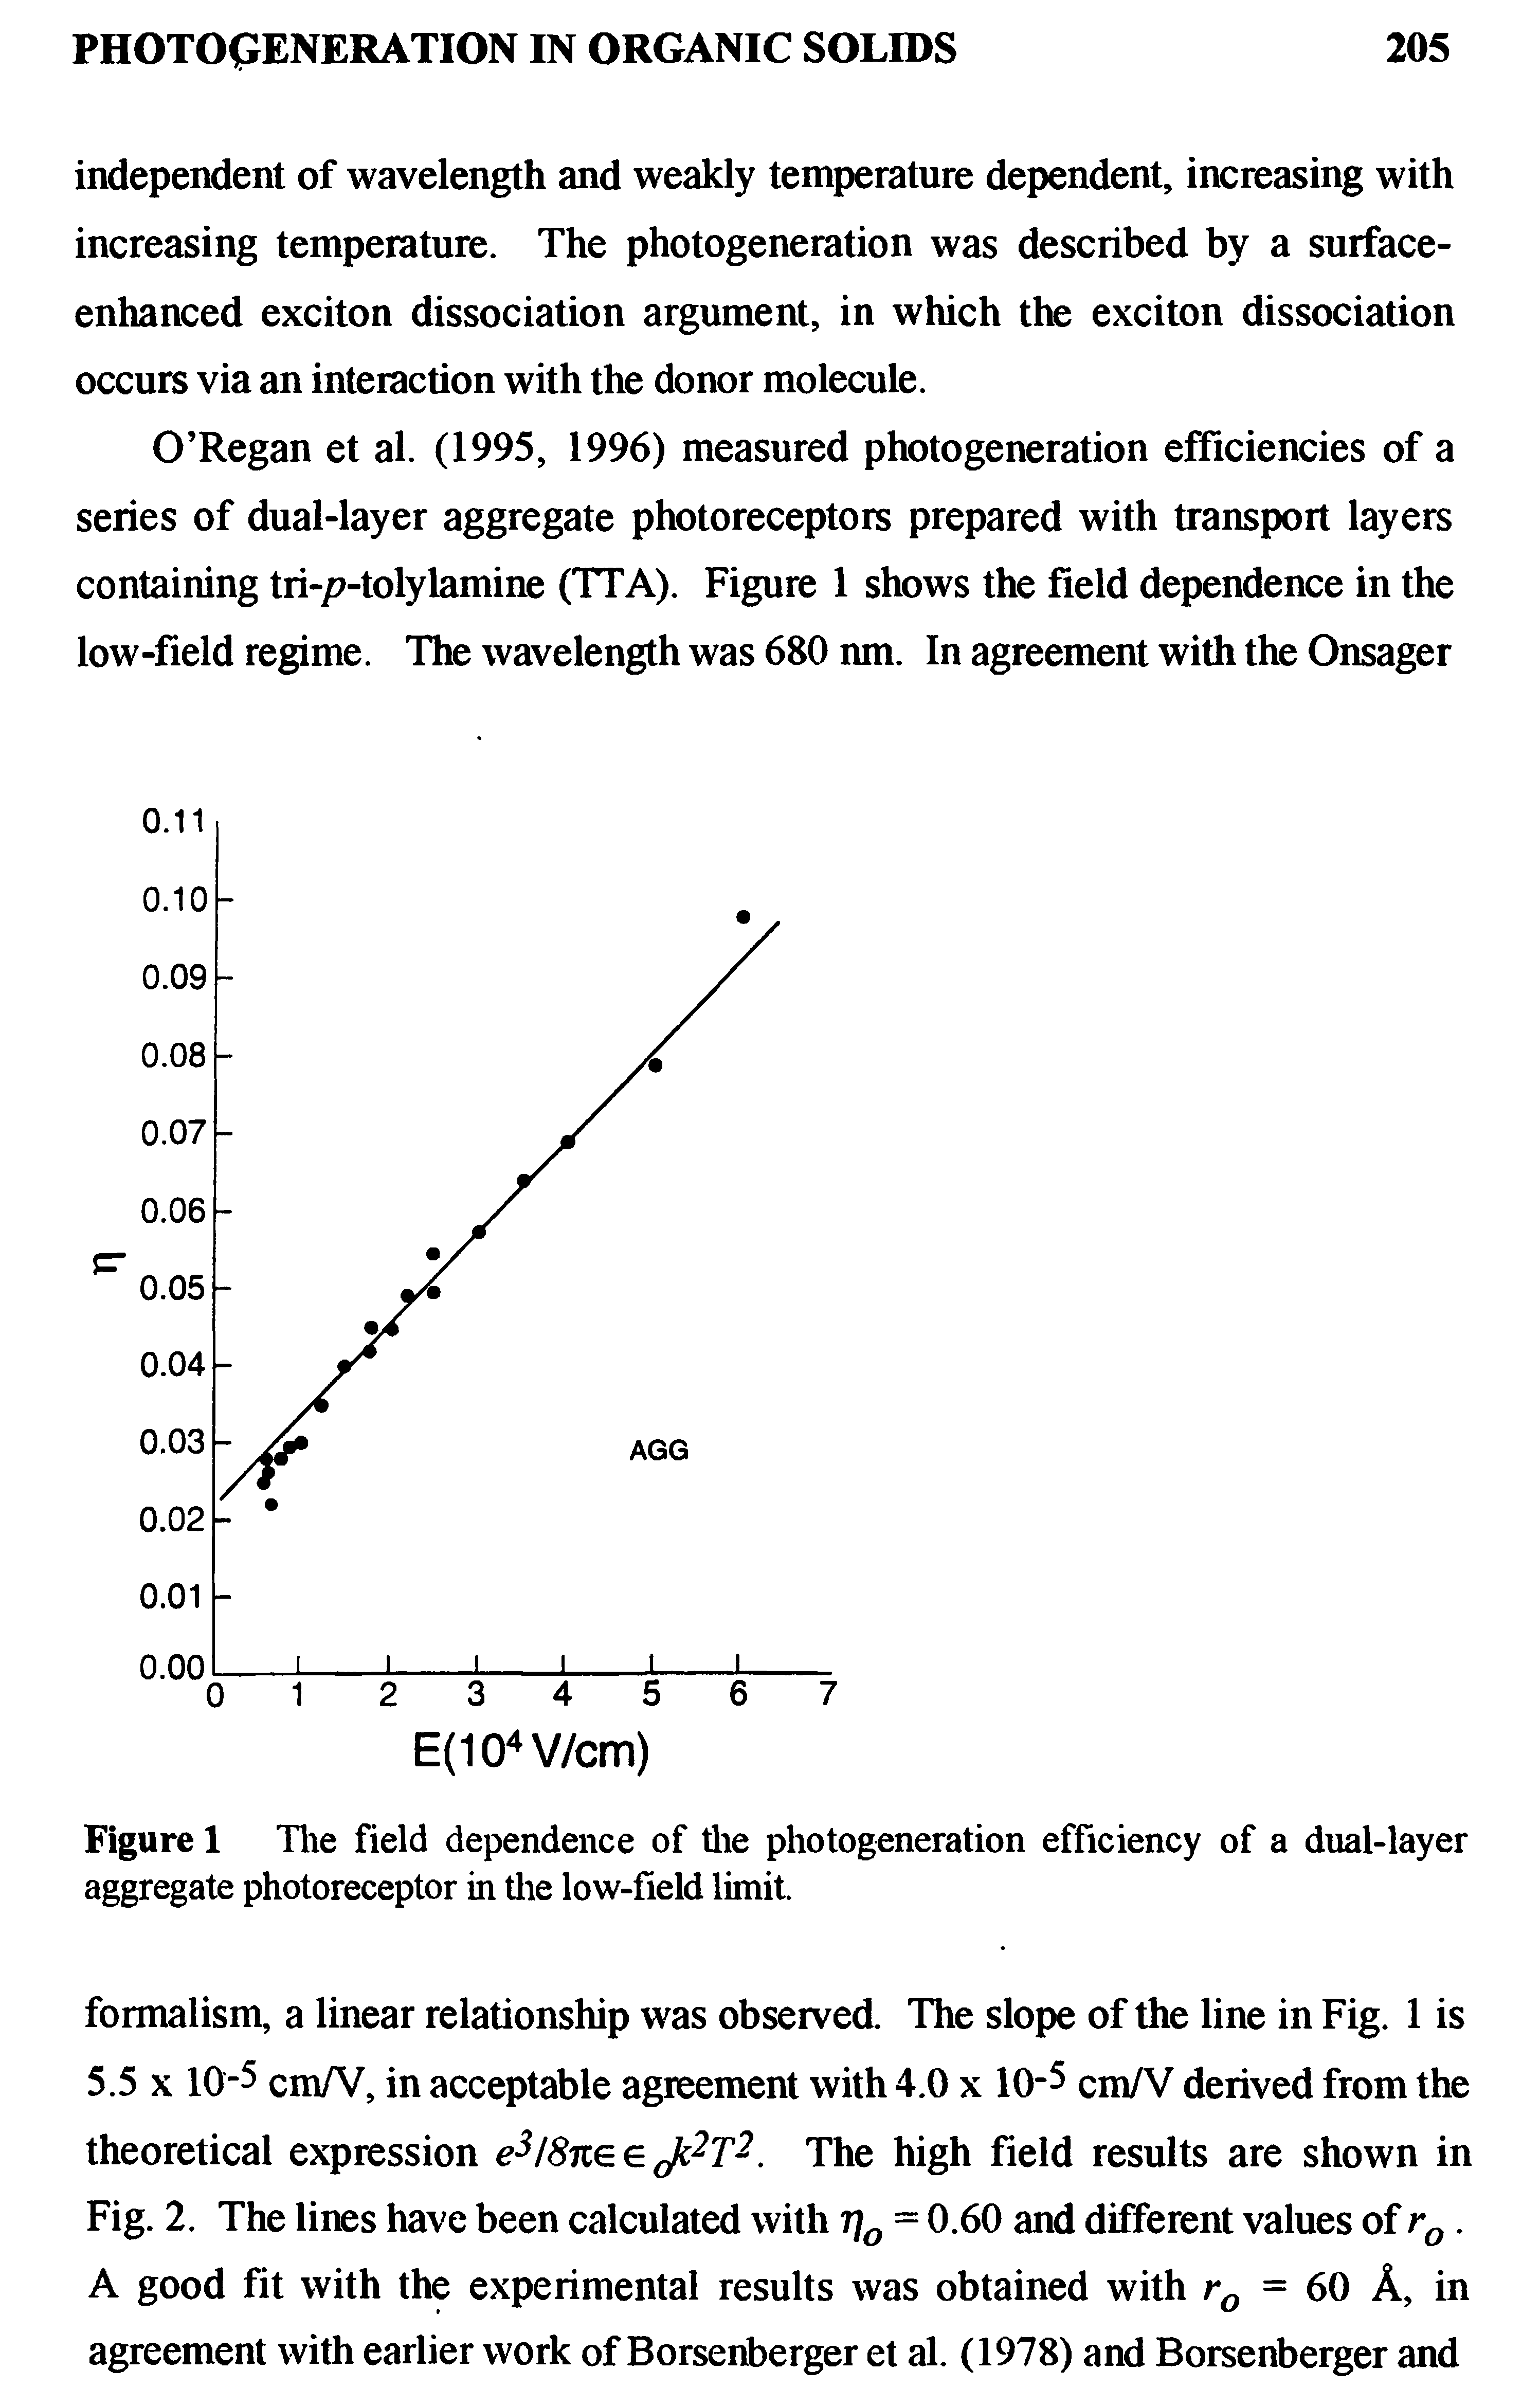 Figure 1 The field dependence of the photogeneration efficiency of a dual-layer aggregate photoreceptor in the low-field limit.